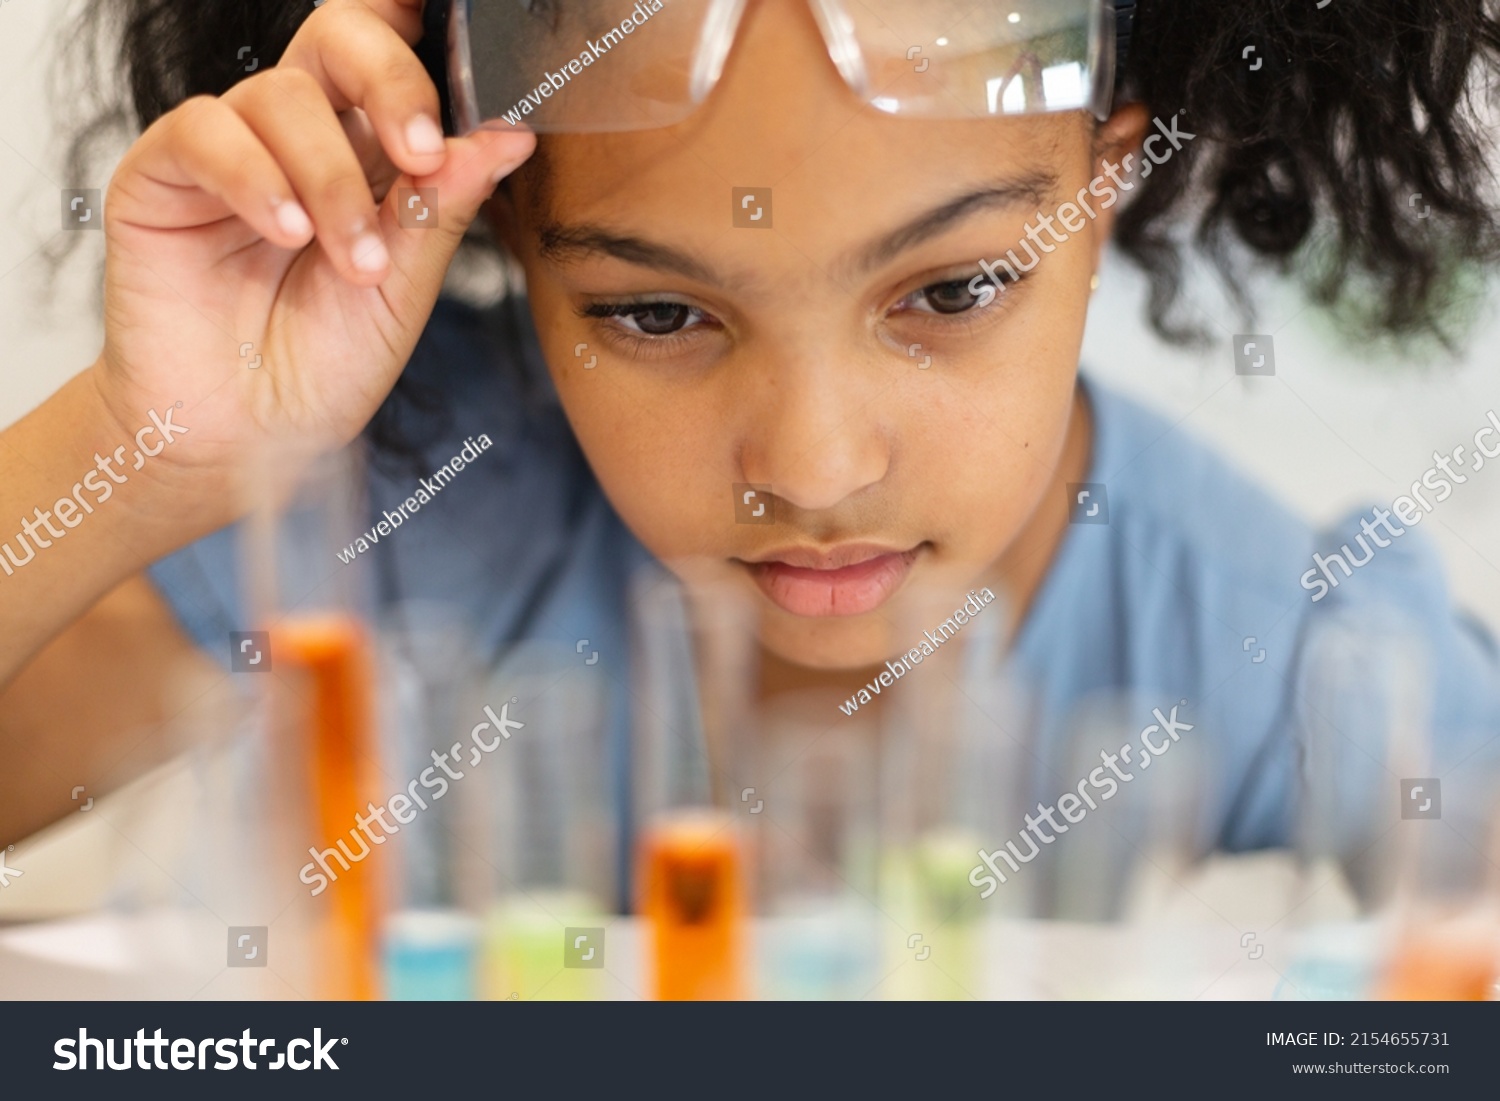 Close-up of biracial elementary schoolgirl looking at chemicals in test tubes during chemistry class. unaltered, education, learning, scientific experiment, stem, protection and school concept. #2154655731